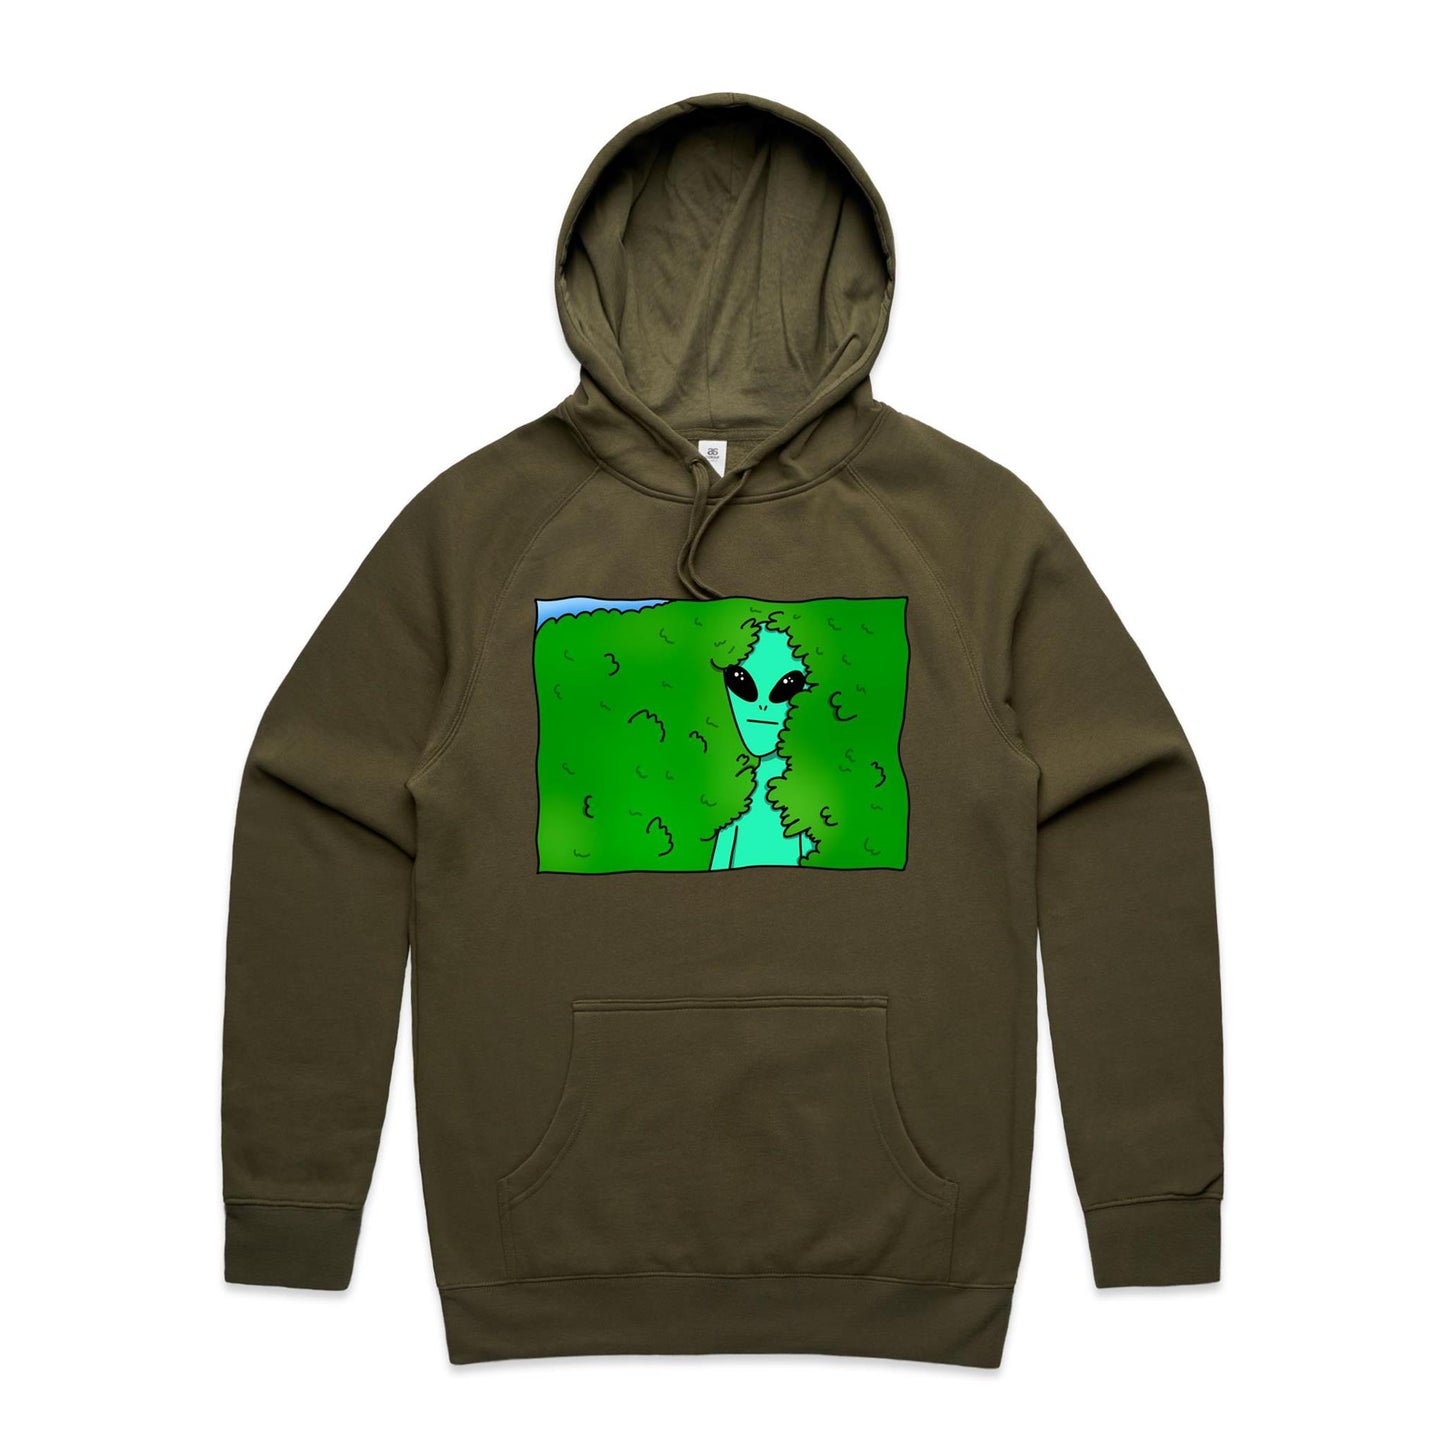 Alien Backing Into Hedge Meme - Supply Hood Army Mens Supply Hoodie Funny Sci Fi